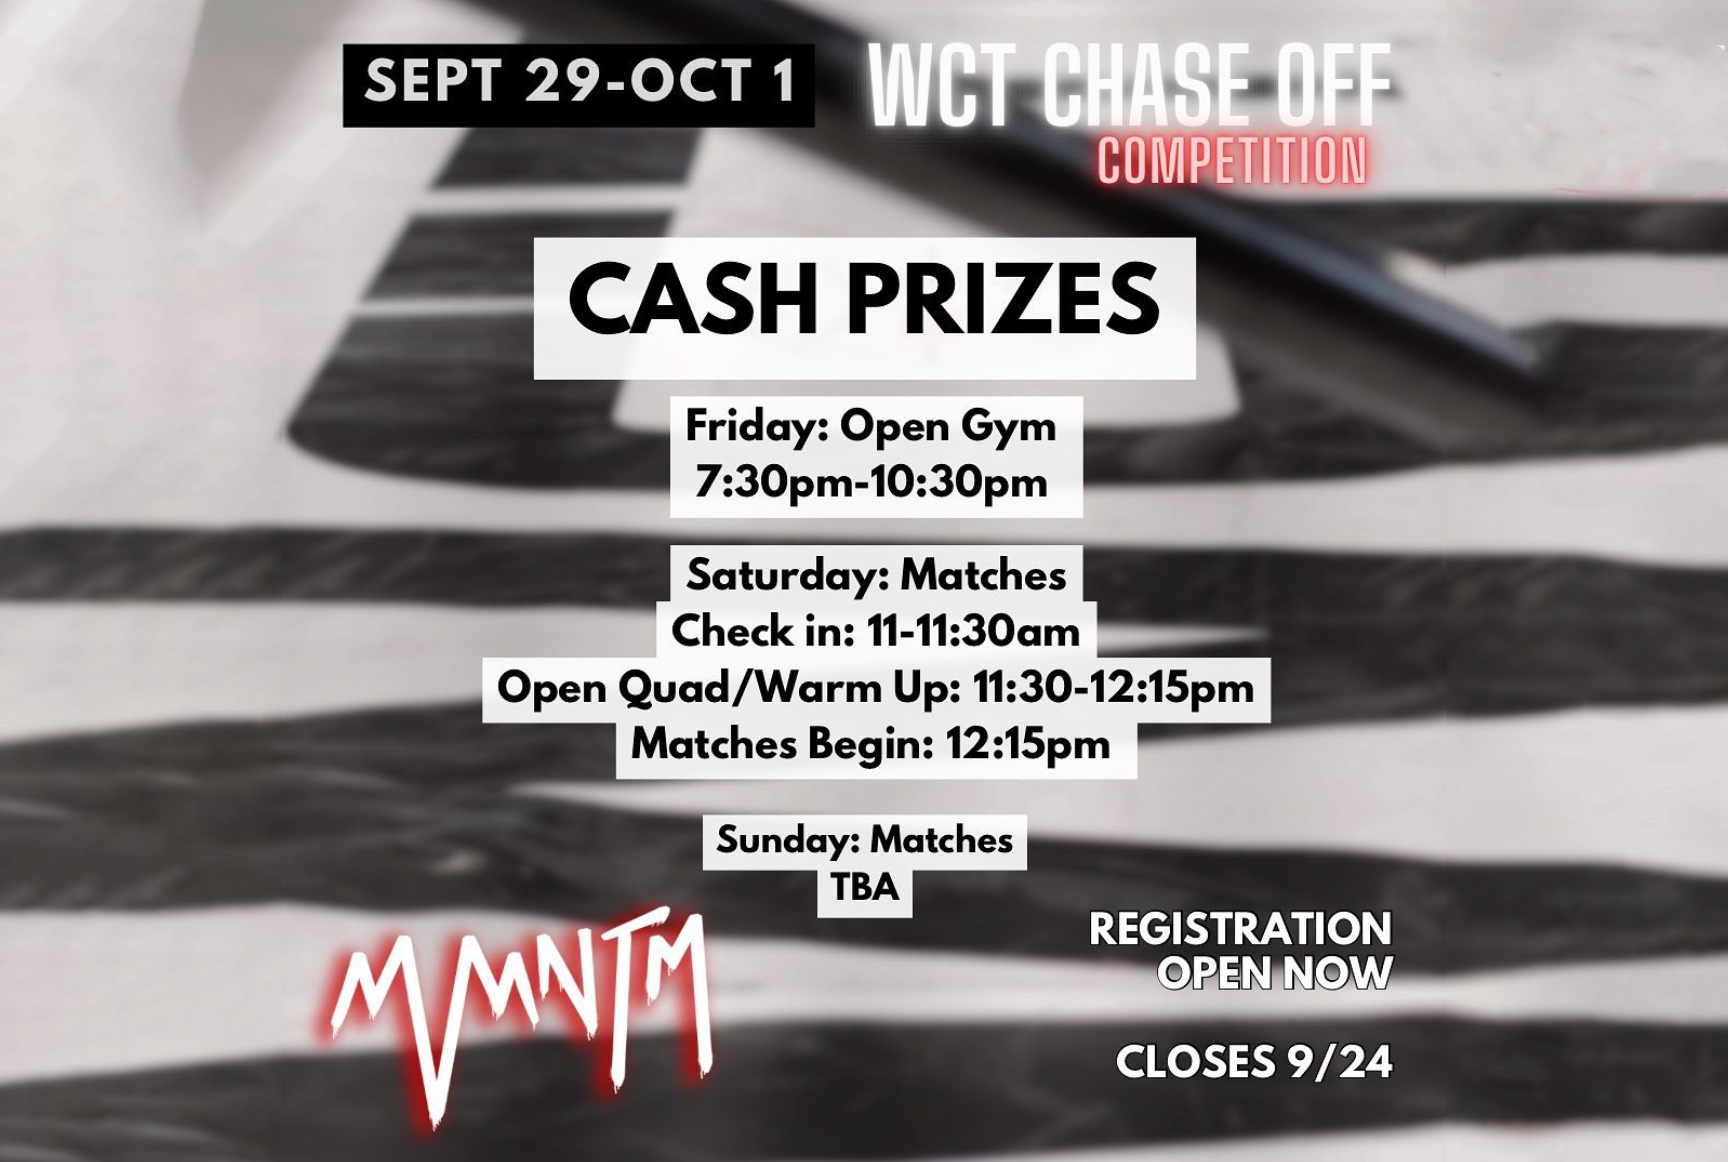 MVMNTM Hosts World Chase Tag Chase Off